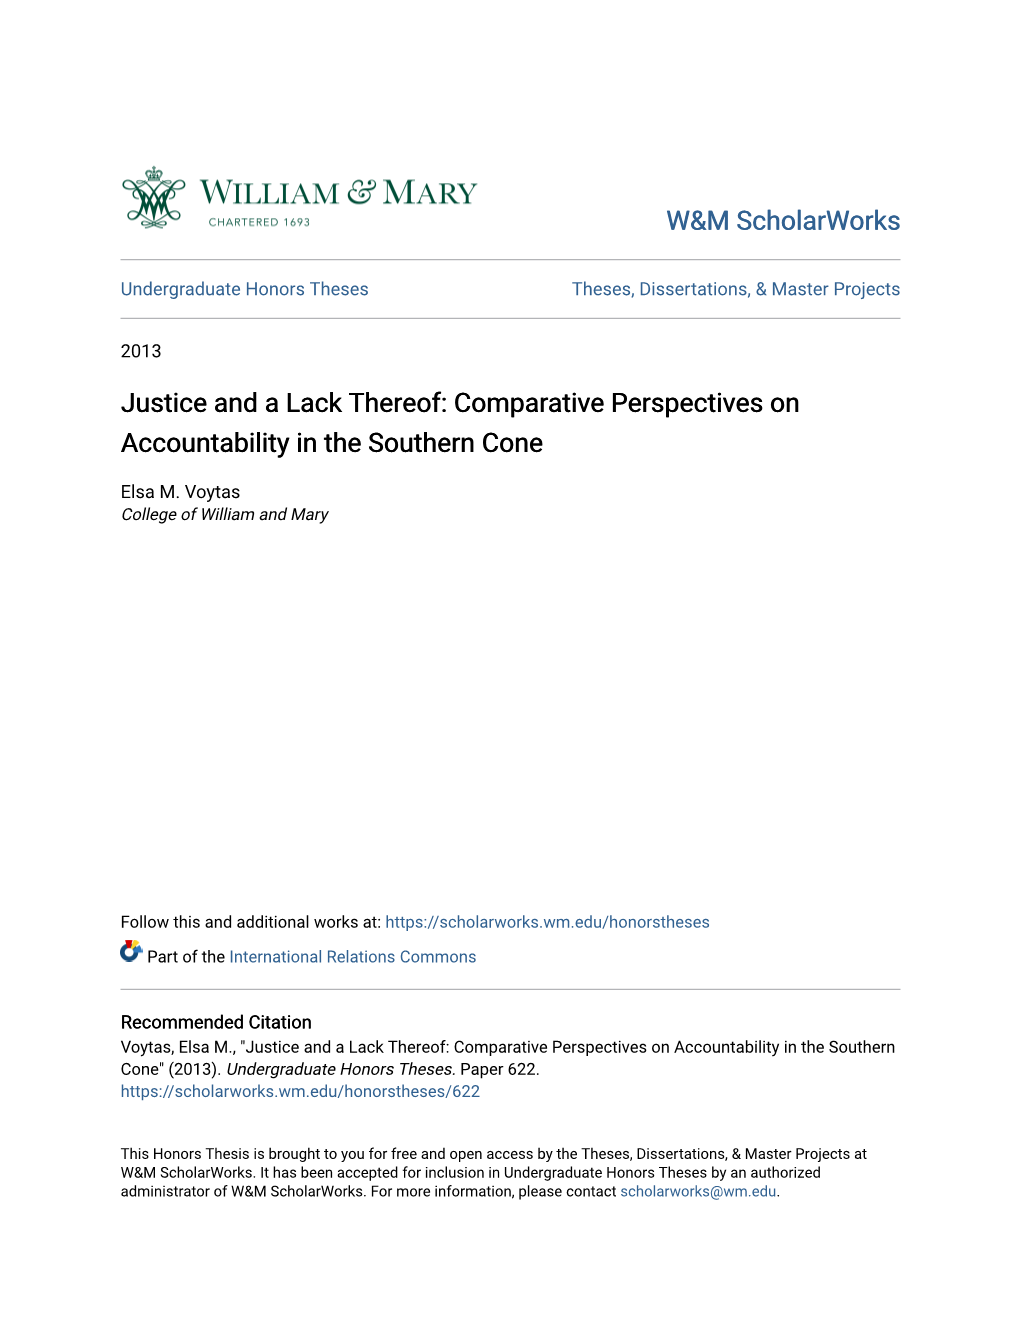 Justice and a Lack Thereof: Comparative Perspectives on Accountability in the Southern Cone